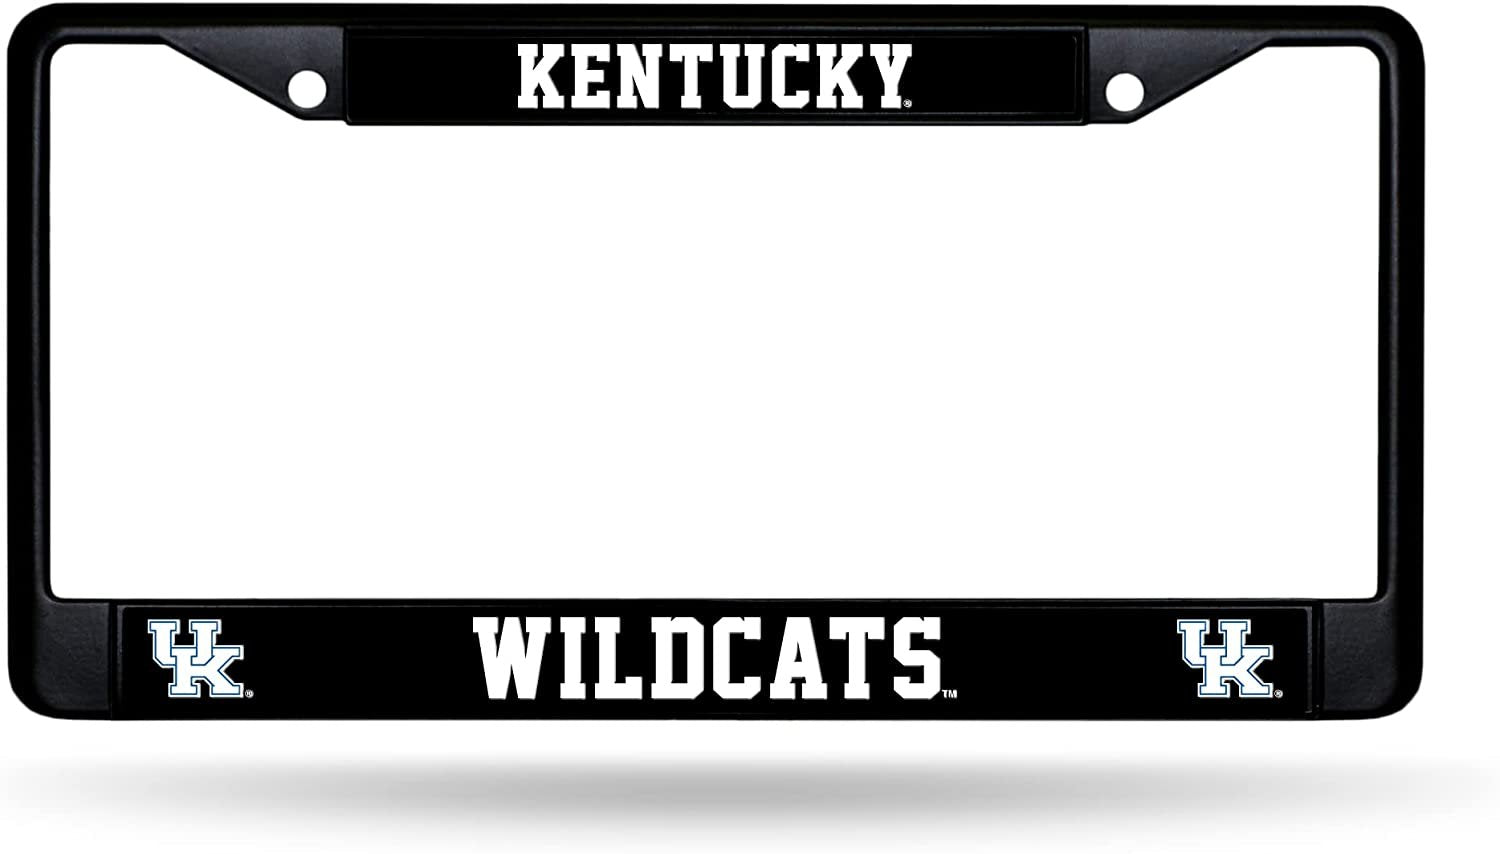 University of Kentucky Wildcats Black Metal License Plate Frame Chrome Tag Cover 6x12 Inch